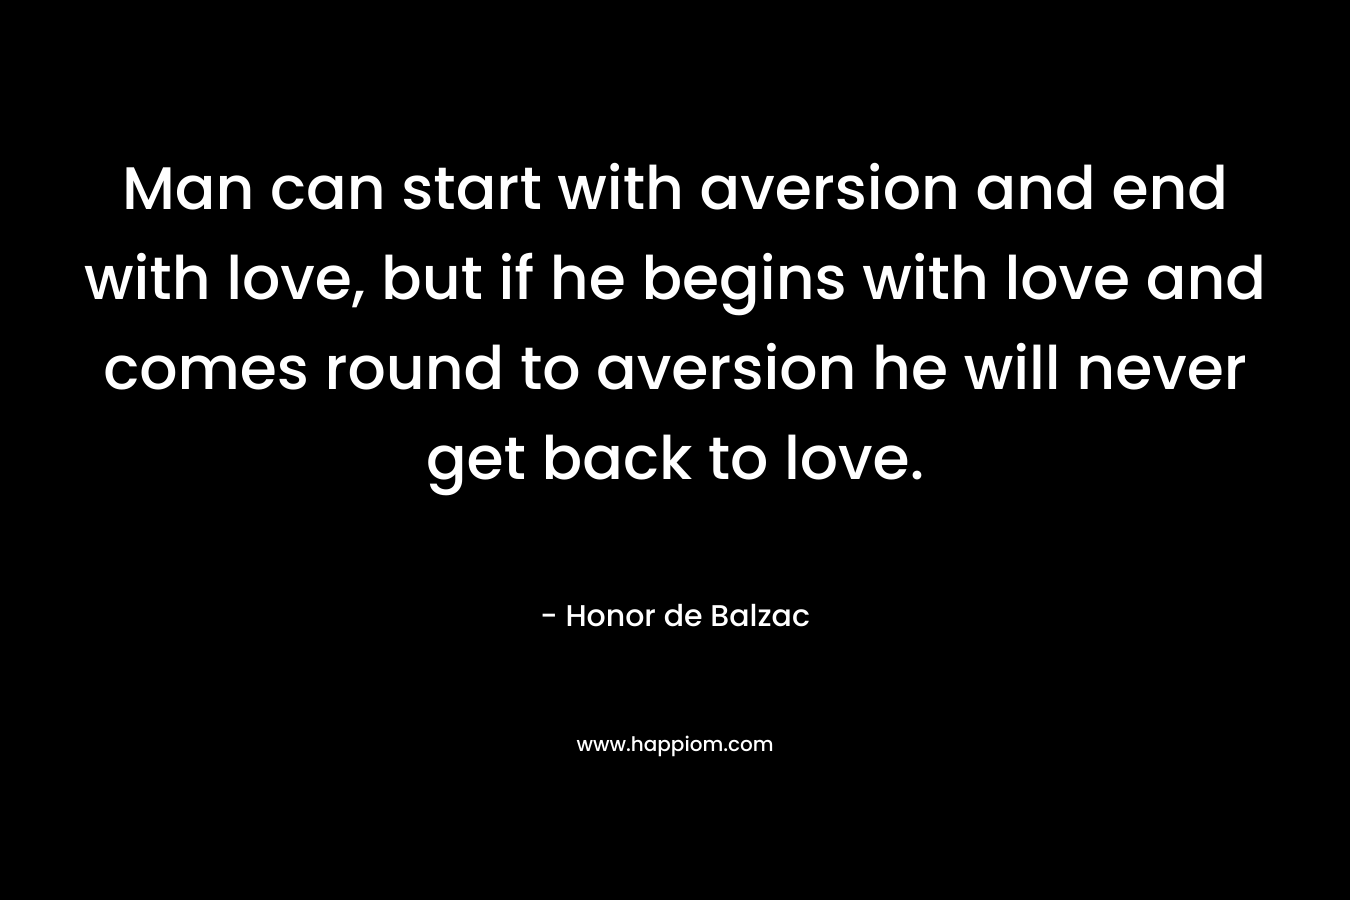 Man can start with aversion and end with love, but if he begins with love and comes round to aversion he will never get back to love. – Honor de Balzac